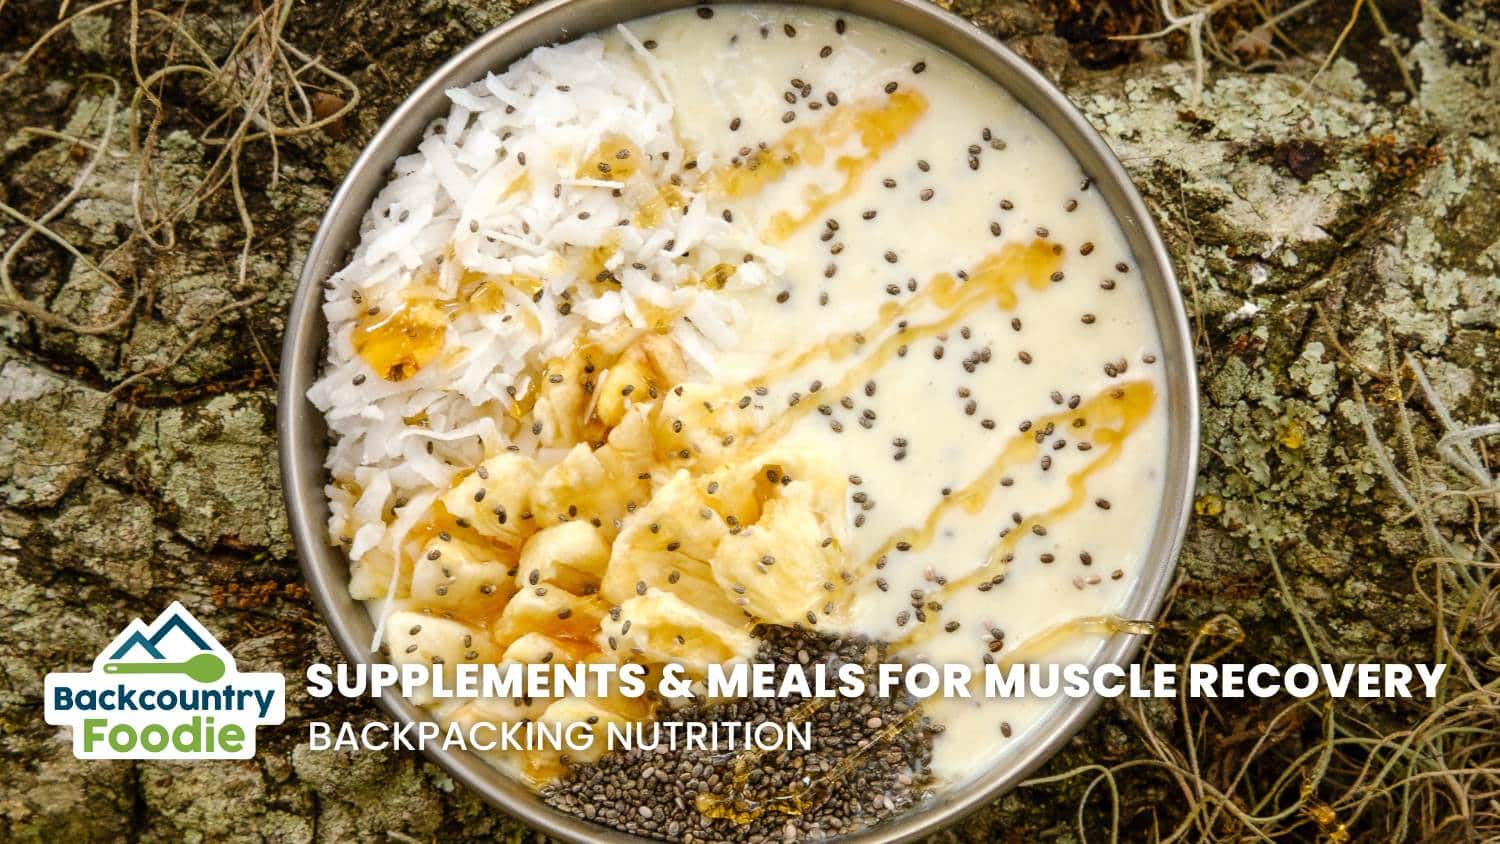 Backcountry Foodie blog Supplements and Meals for Muscle Recovery Backpacking Nutrition blog thumbnail